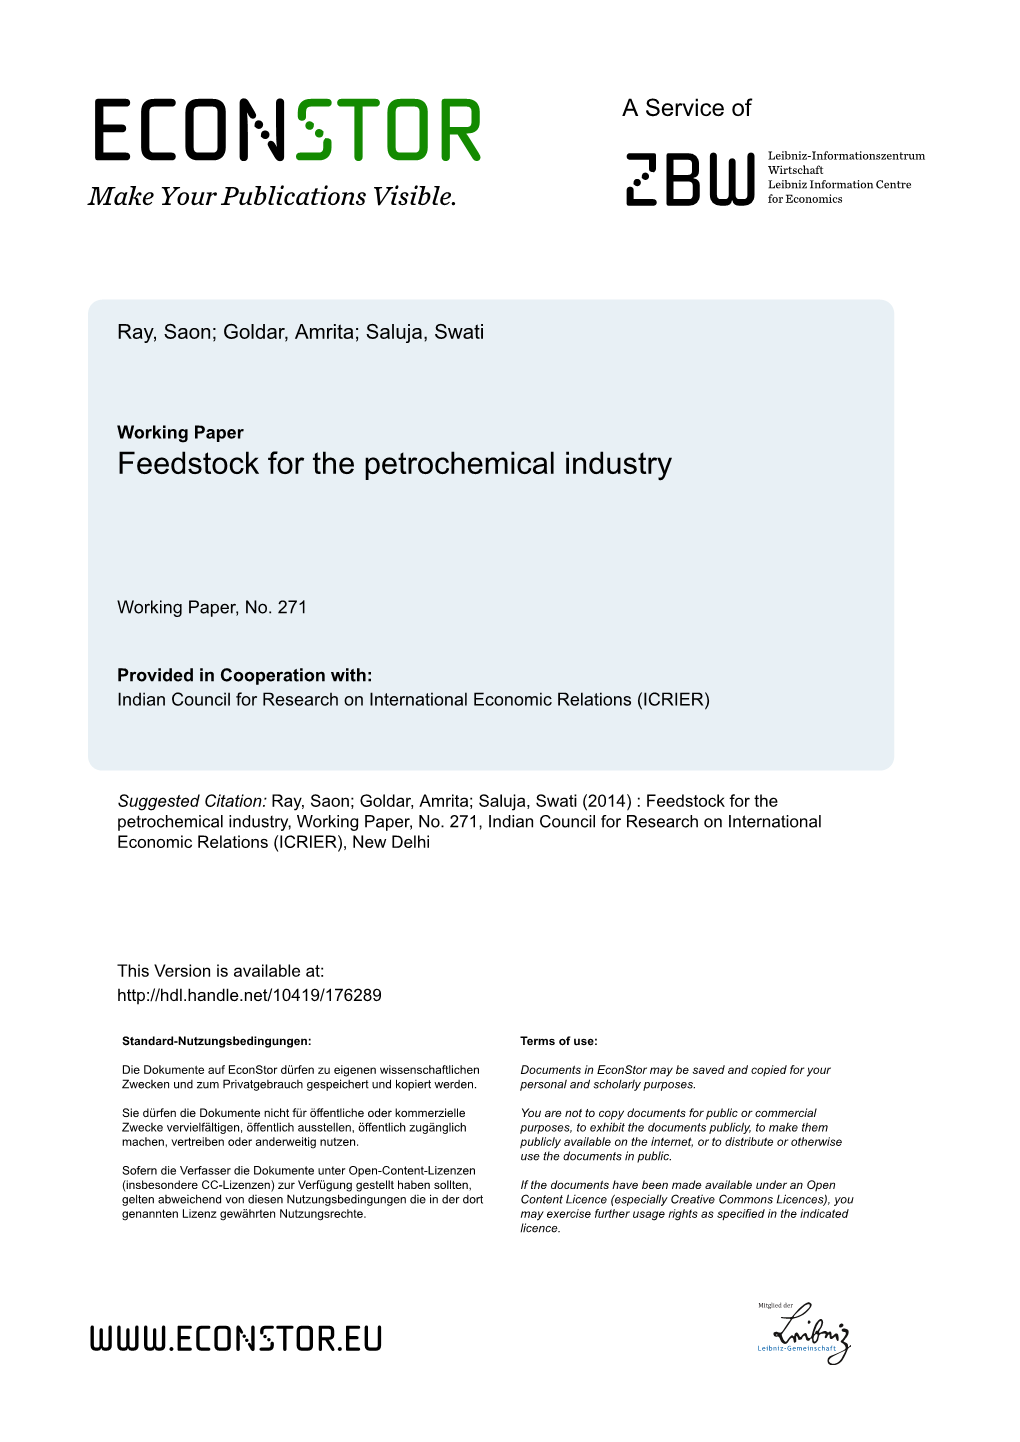 Feedstock for the Petrochemical Industry